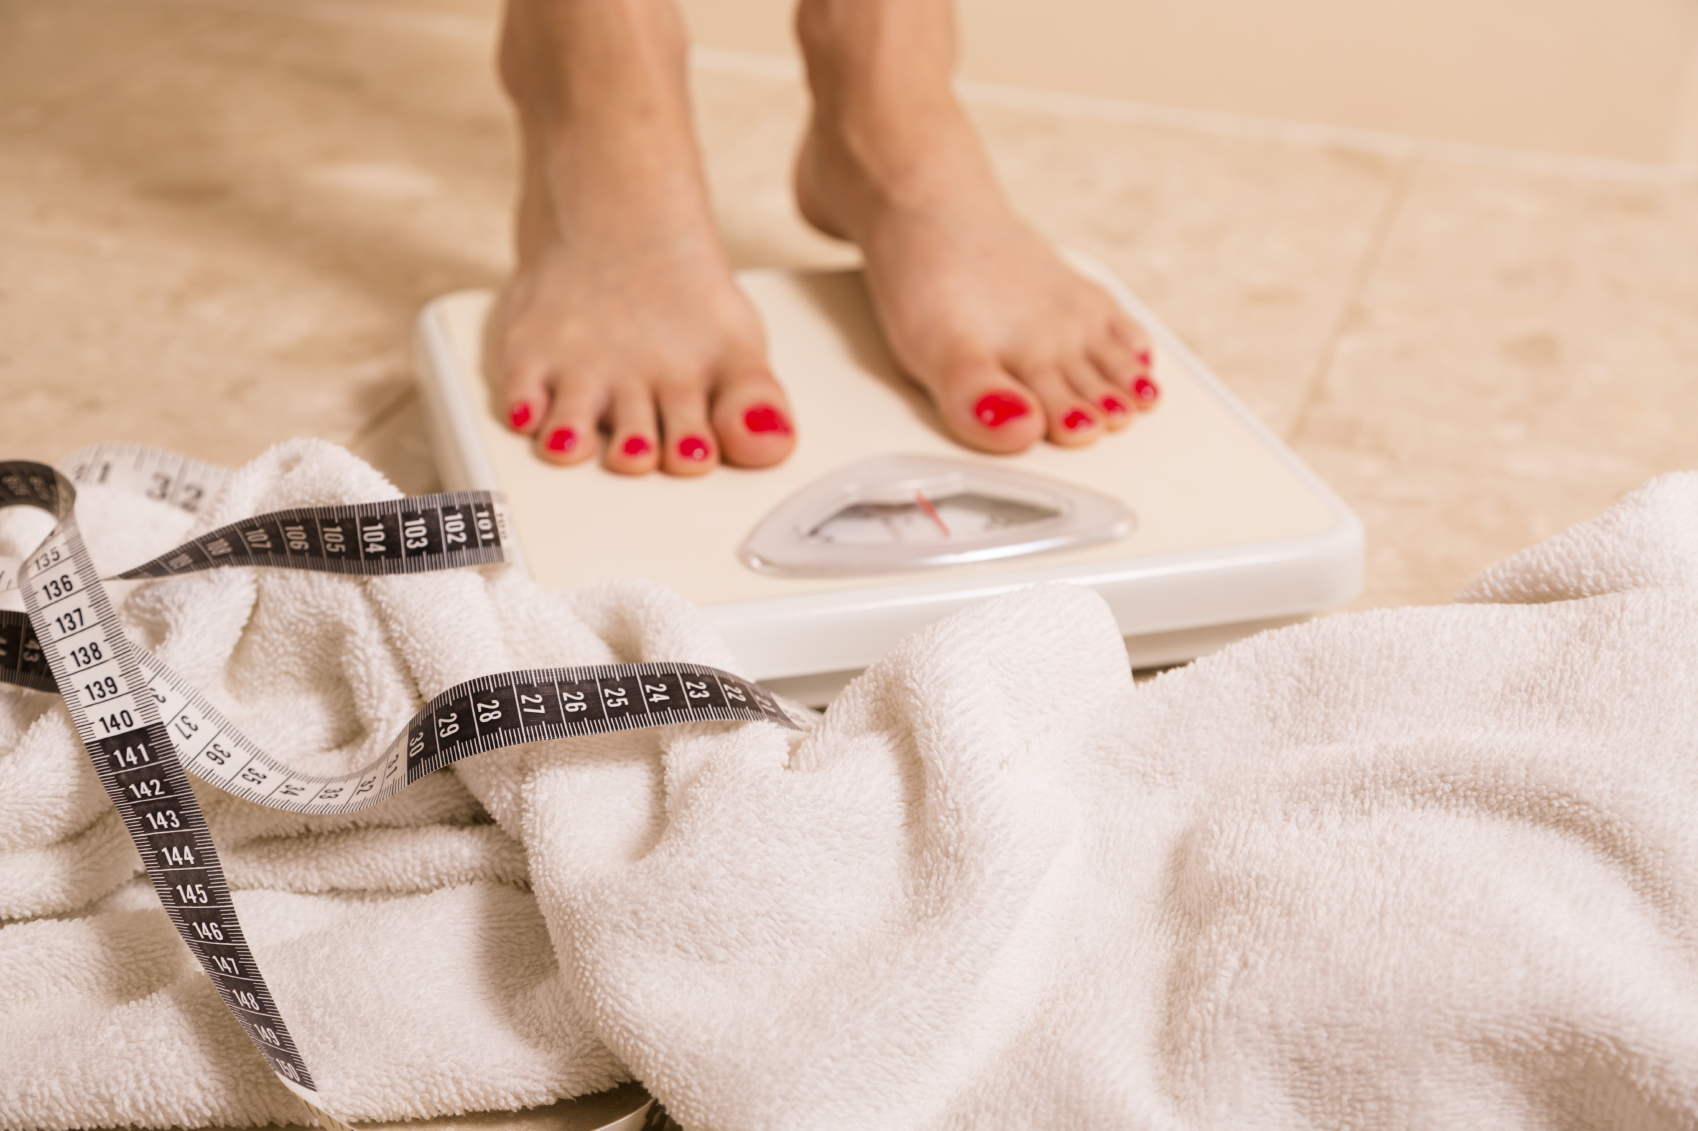 Too Fat Too Thin How To Really Find Your Ideal Weight Nz Herald